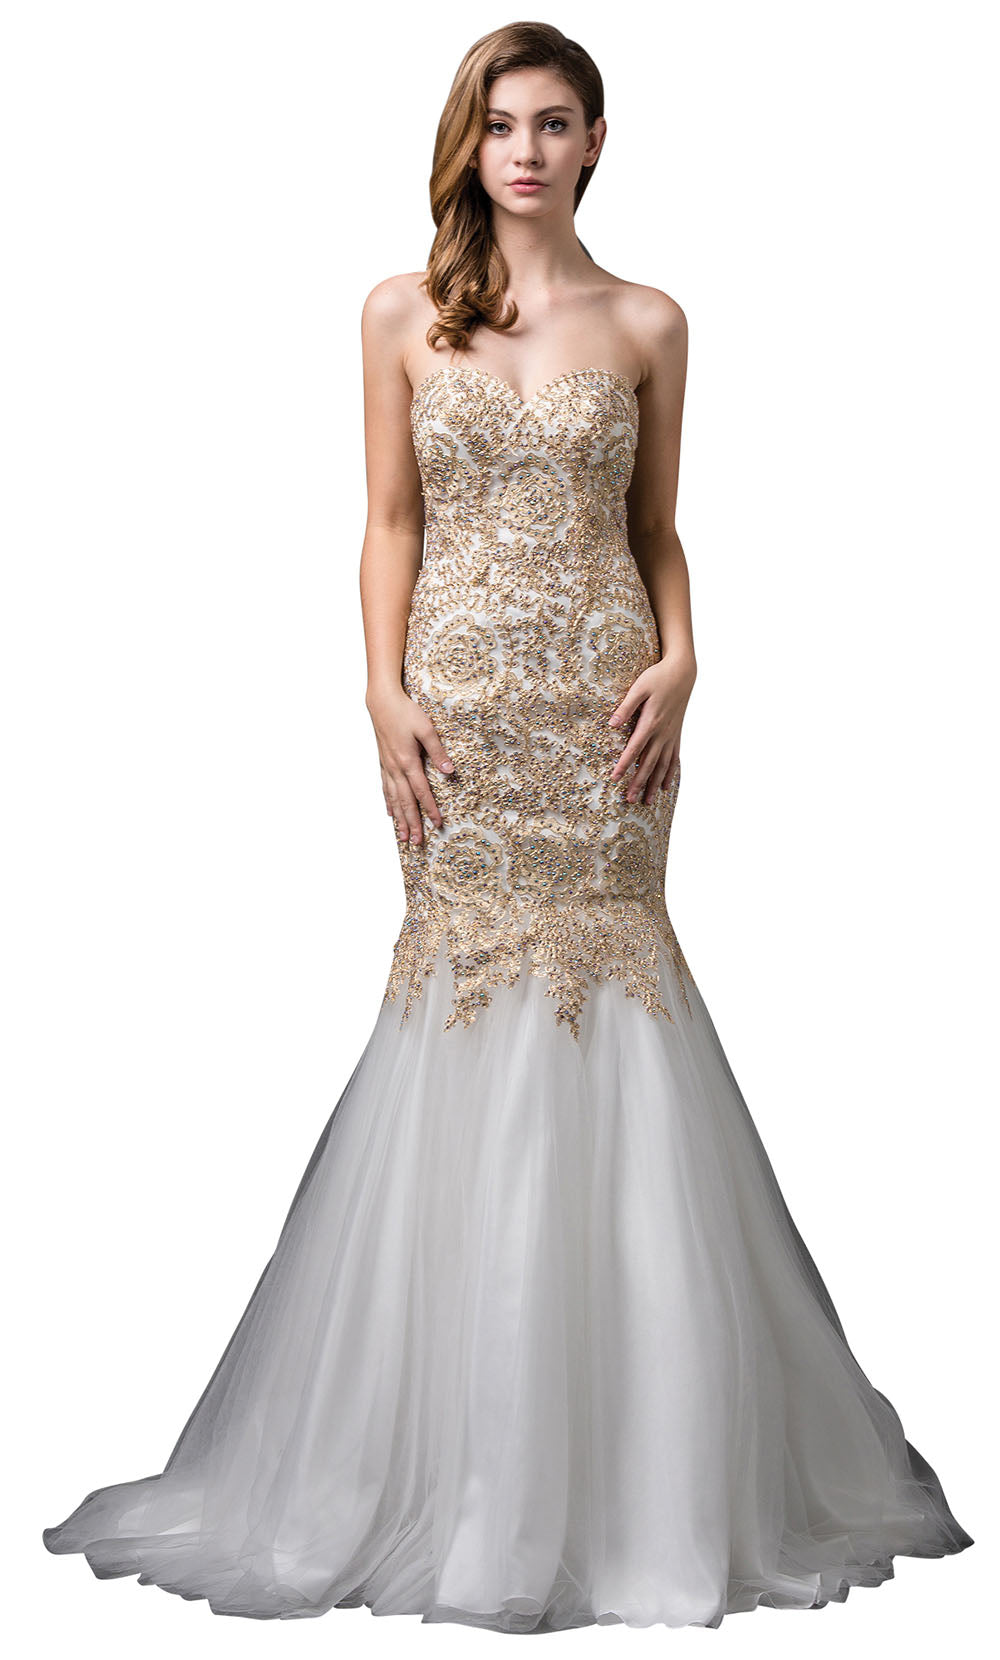 Dancing Queen - 9932 Strapless Beaded Lace Applique Mermaid Gown In Champagne & Gold